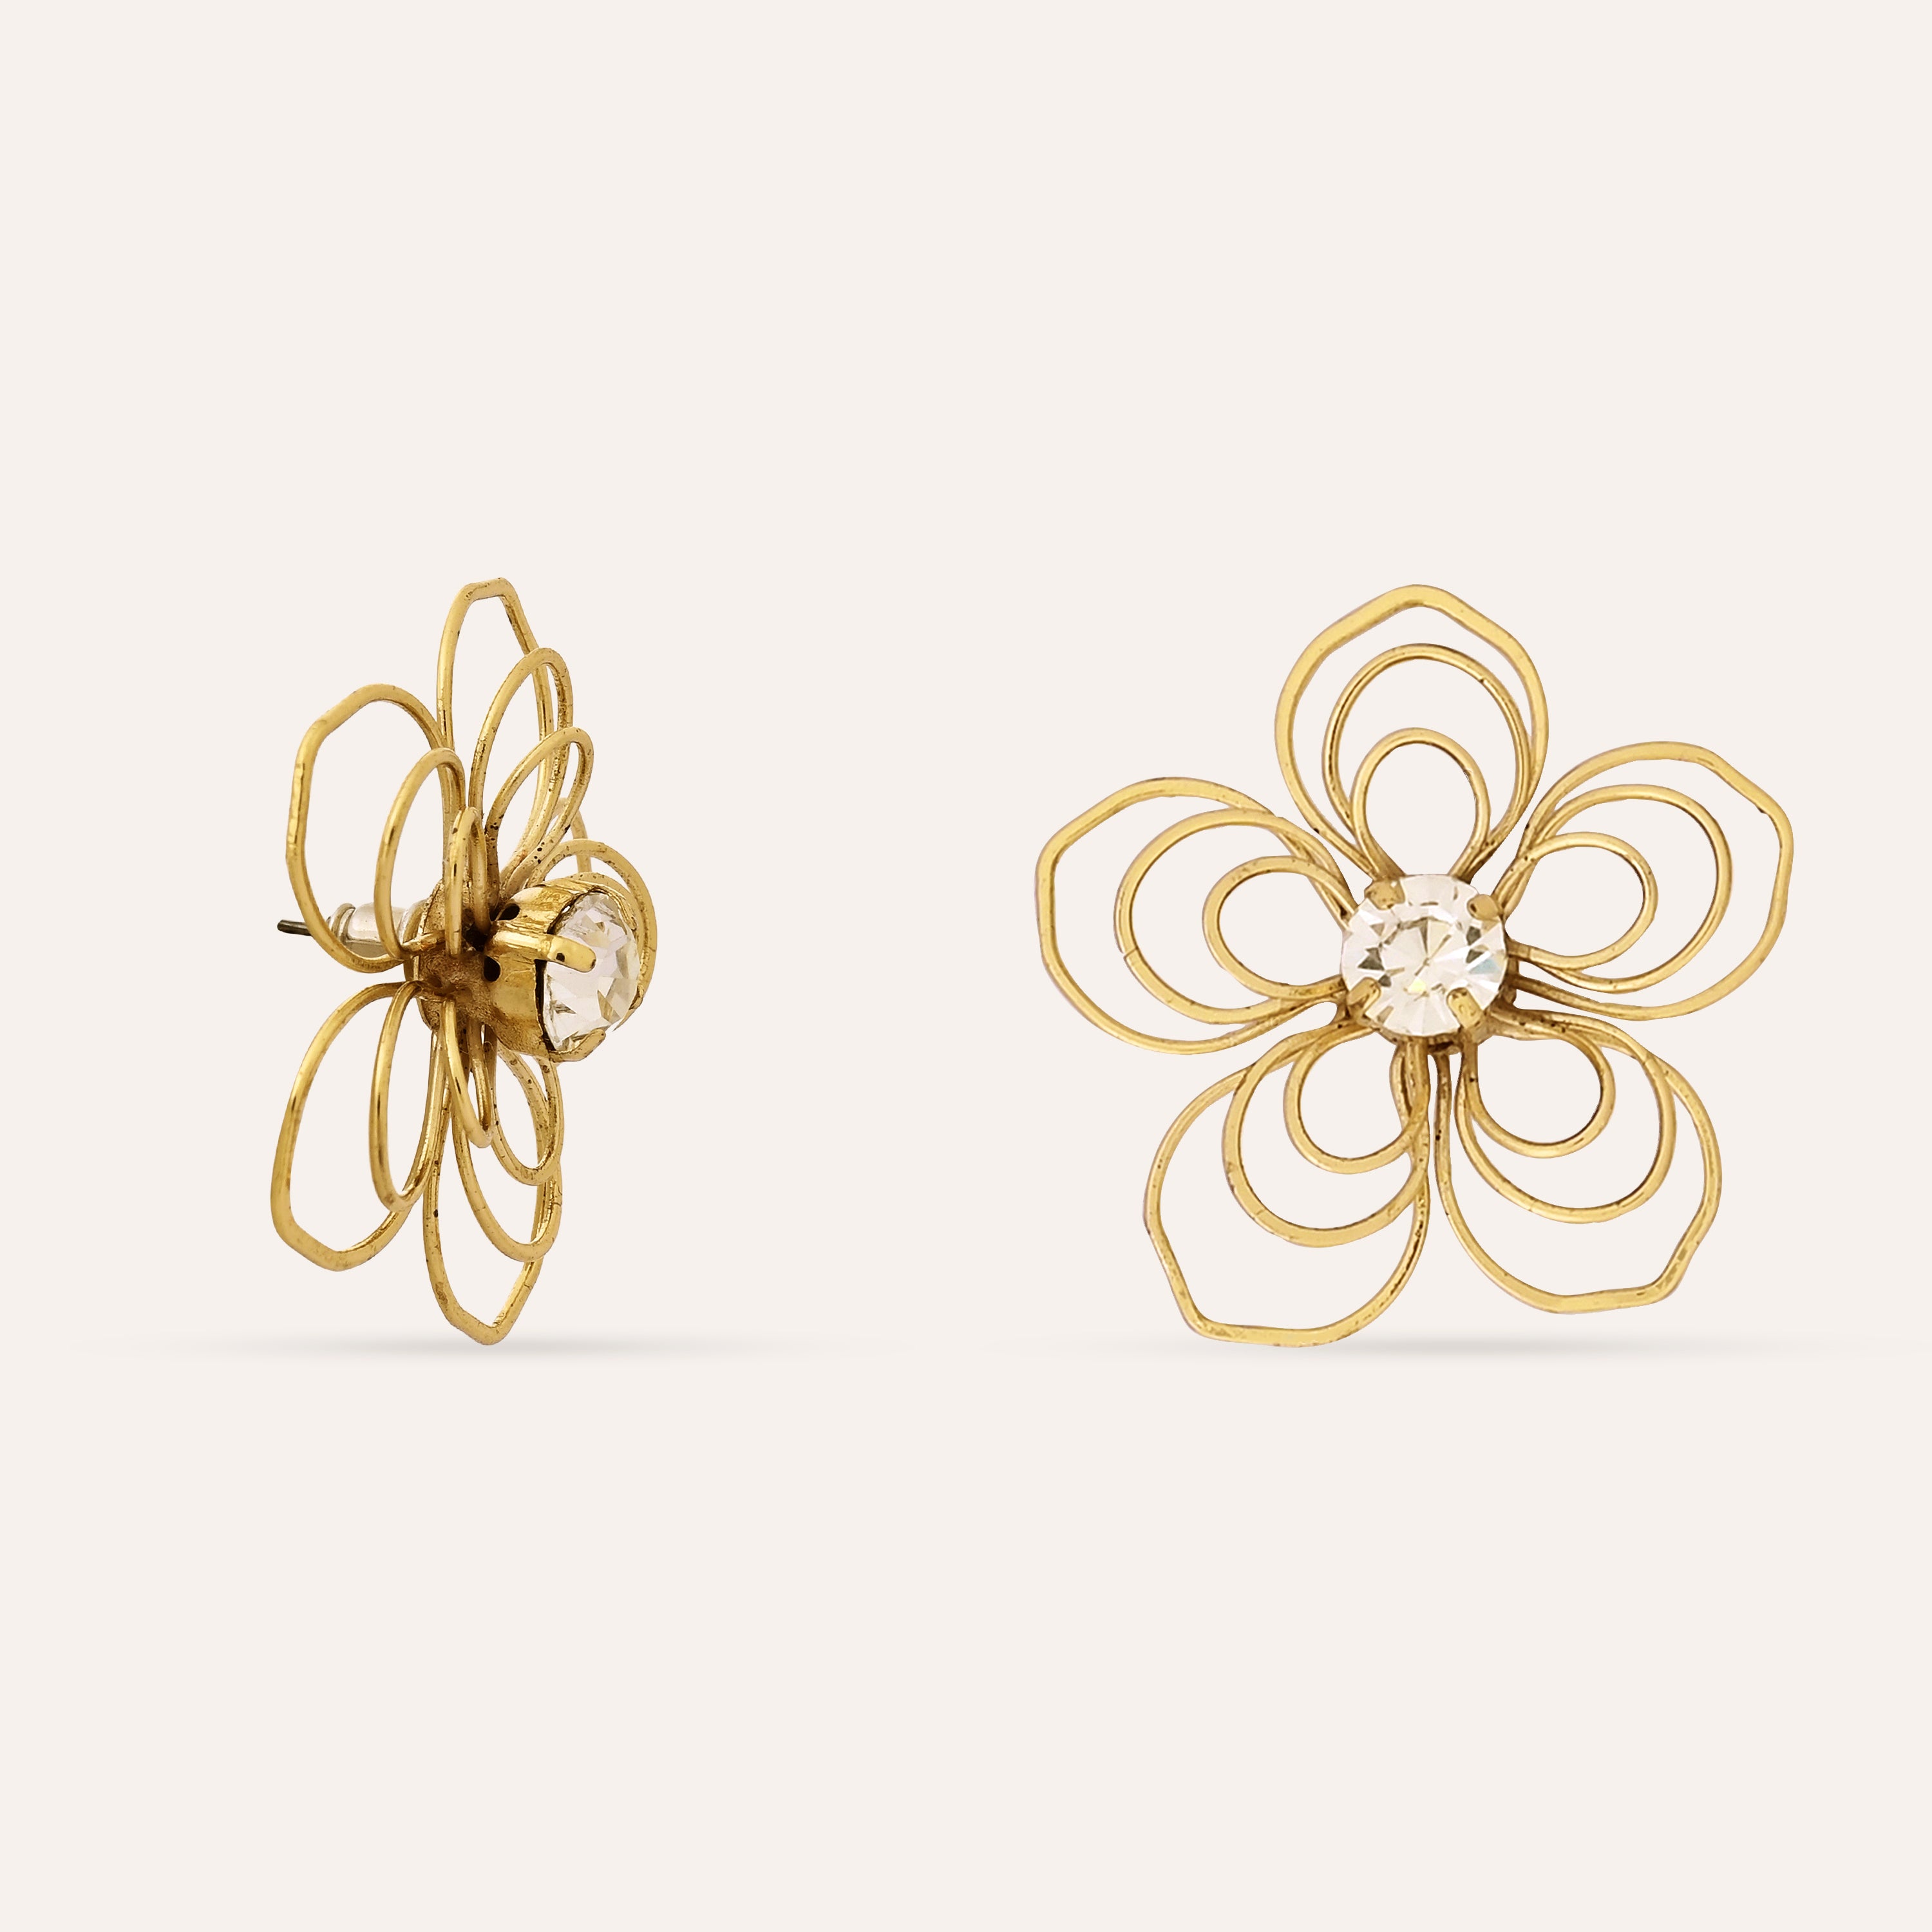 TFC Flower Power Gold Plated Stud Earrings- Discover daily wear gold earrings including stud earrings, hoop earrings, and pearl earrings, perfect as earrings for women and earrings for girls.Find the cheapest fashion jewellery which is anti-tarnis​h only at The Fun company.